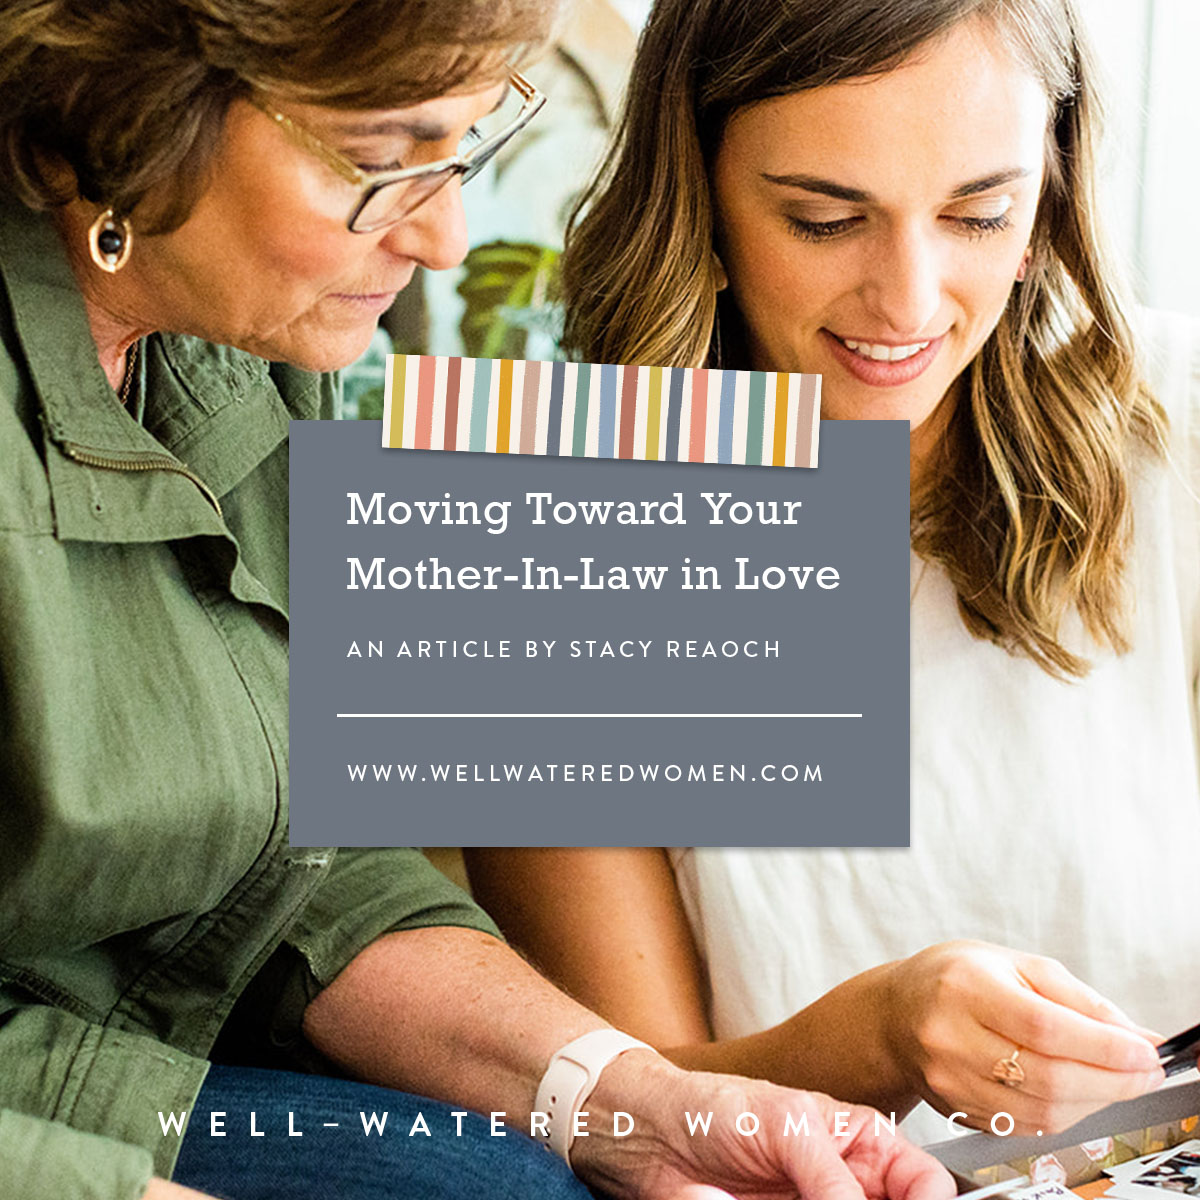 https://wellwateredwomen.com/wp-content/uploads/2022/03/Moving-Toward-Your-Mother-in-Law-in-Love%E2%80%93an-Article-by-Well-Watered-Women.jpeg